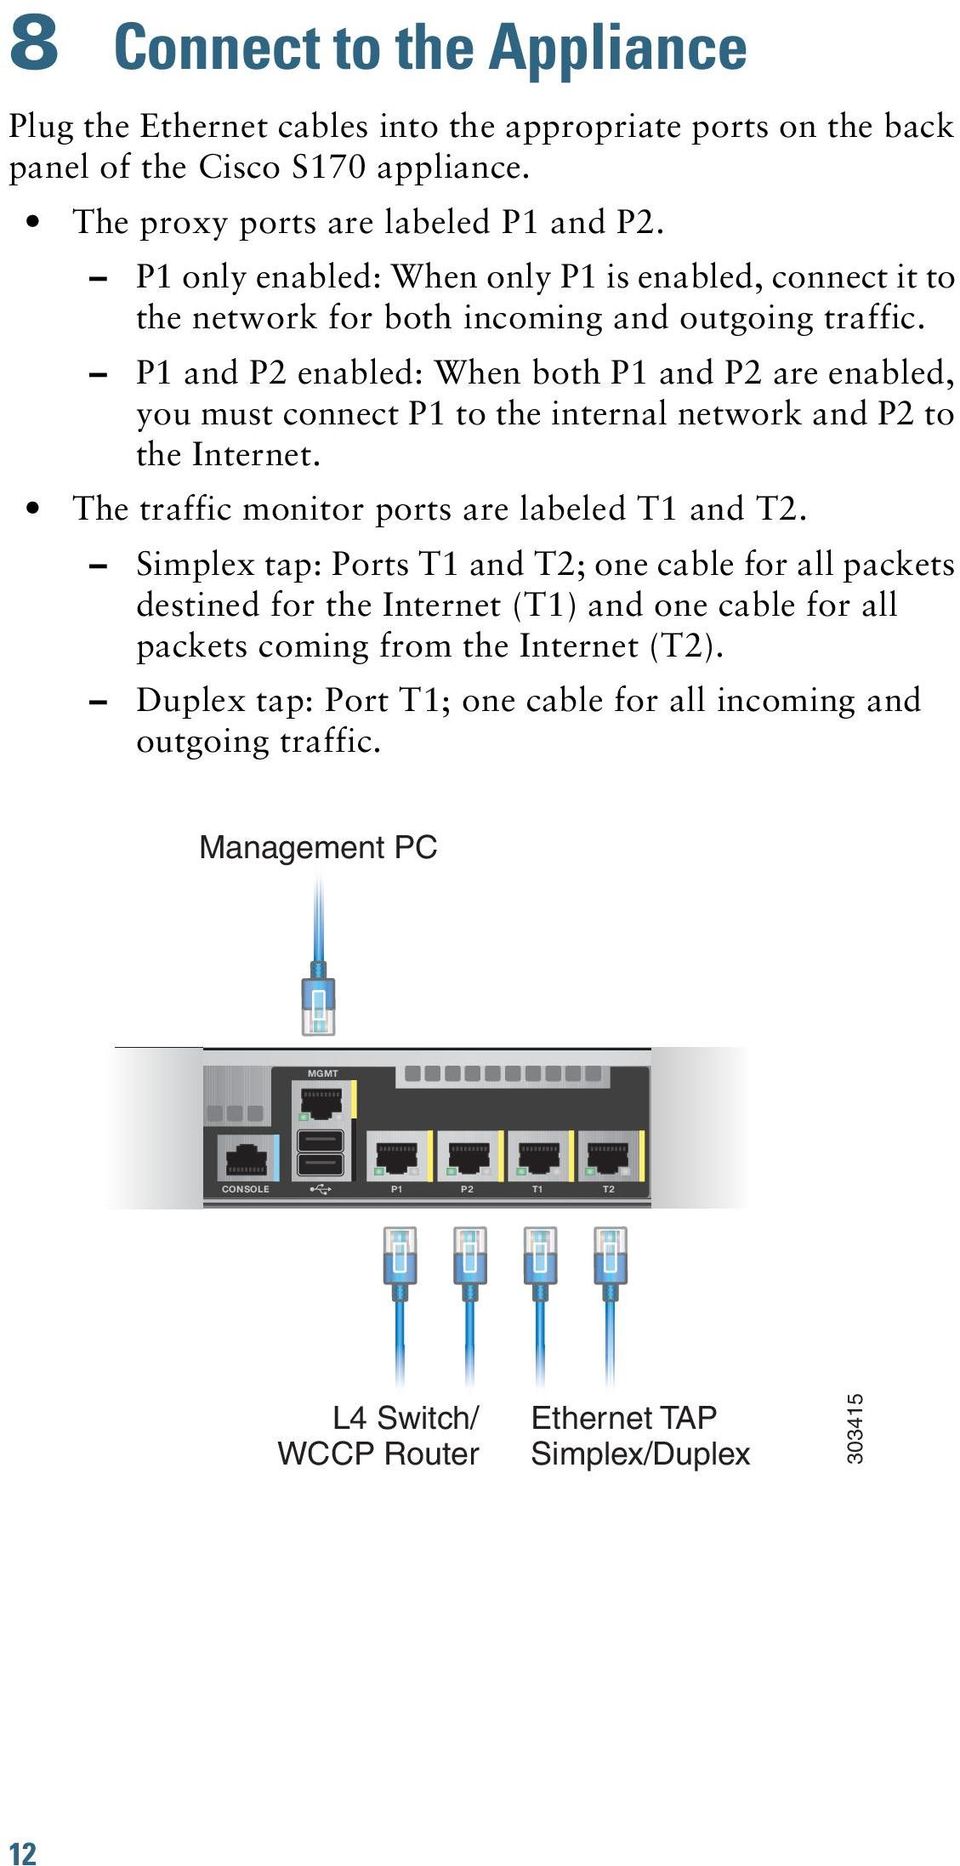 P1 and P2 enabled: When both P1 and P2 are enabled, you must connect P1 to the internal network and P2 to the Internet. The traffic monitor ports are labeled T1 and T2.